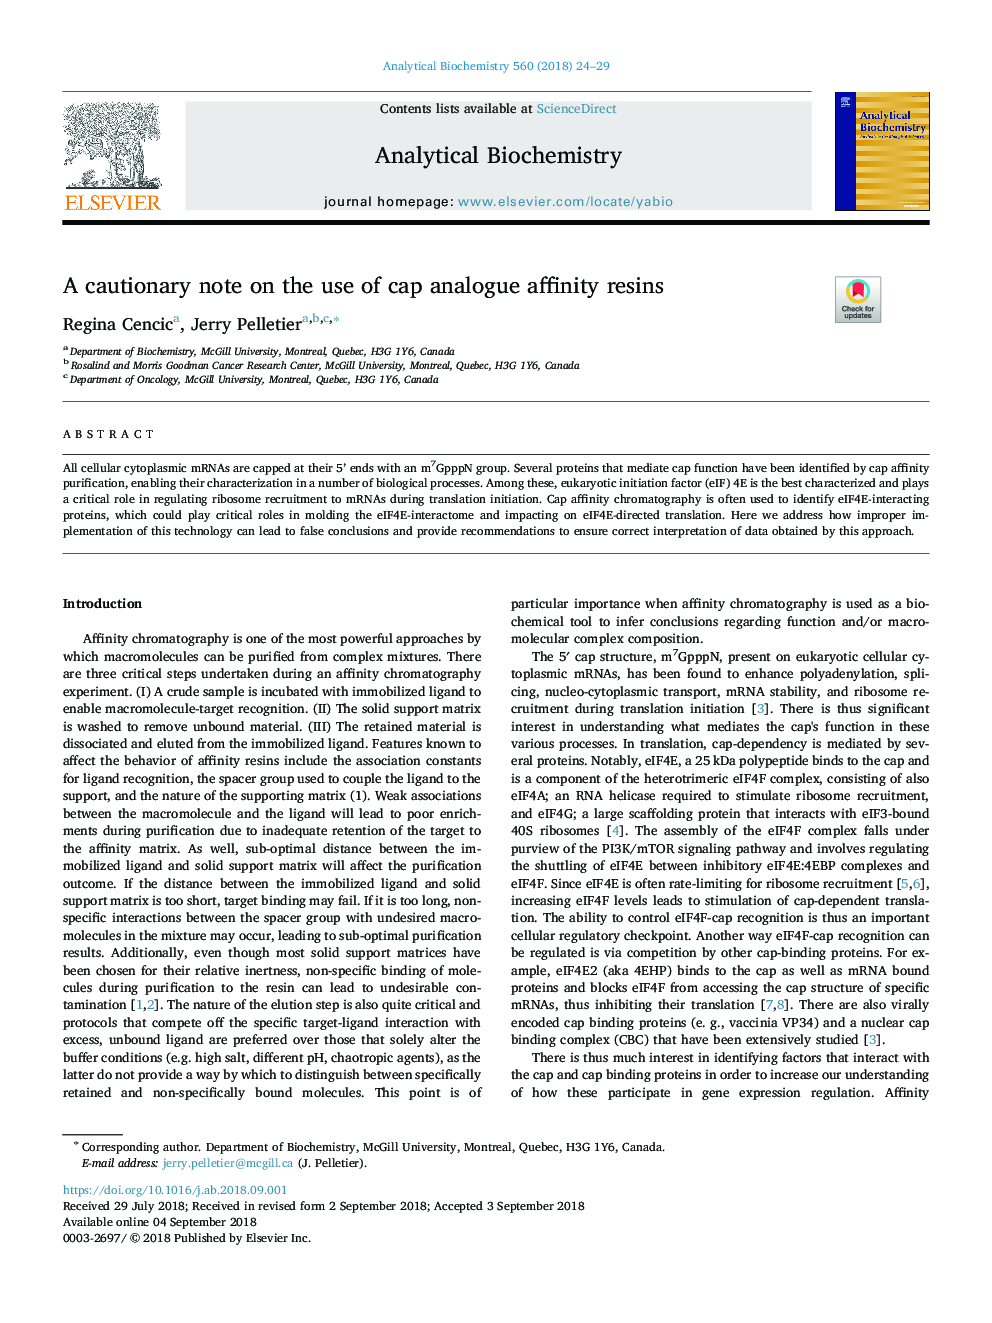 A cautionary note on the use of cap analogue affinity resins